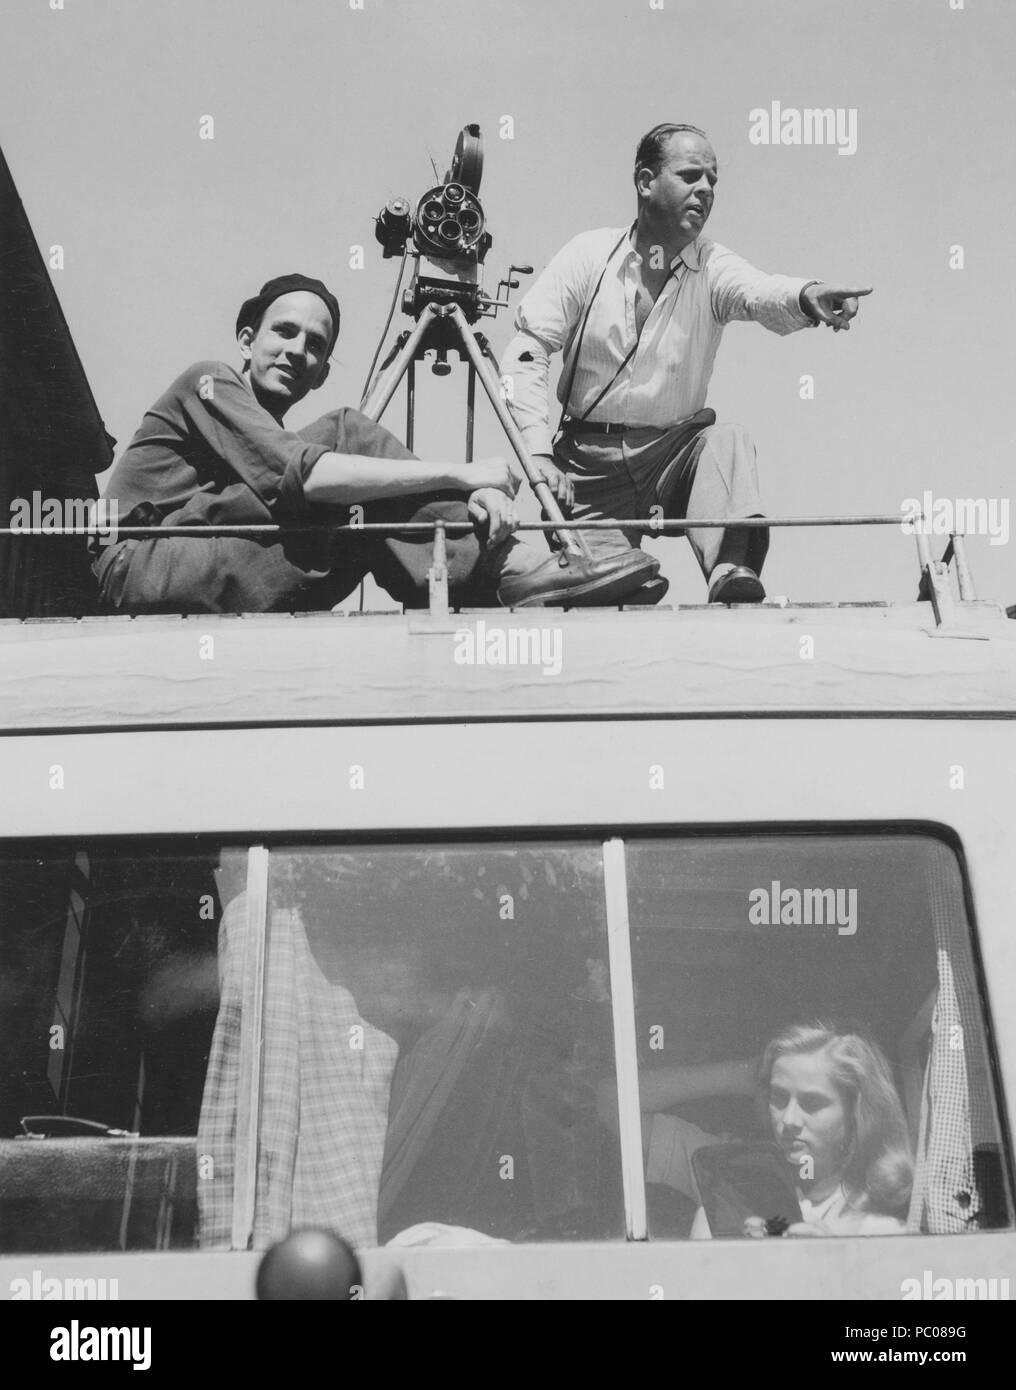 Ingmar Bergman. 1918-2007.  Swedish film director. Pictured here during the filming of the movie The Crisis. On the top of the bus roof, film photographer Gösta Roosling has set up his camera. Actress Inga landgré is behind the bus window. Stock Photo